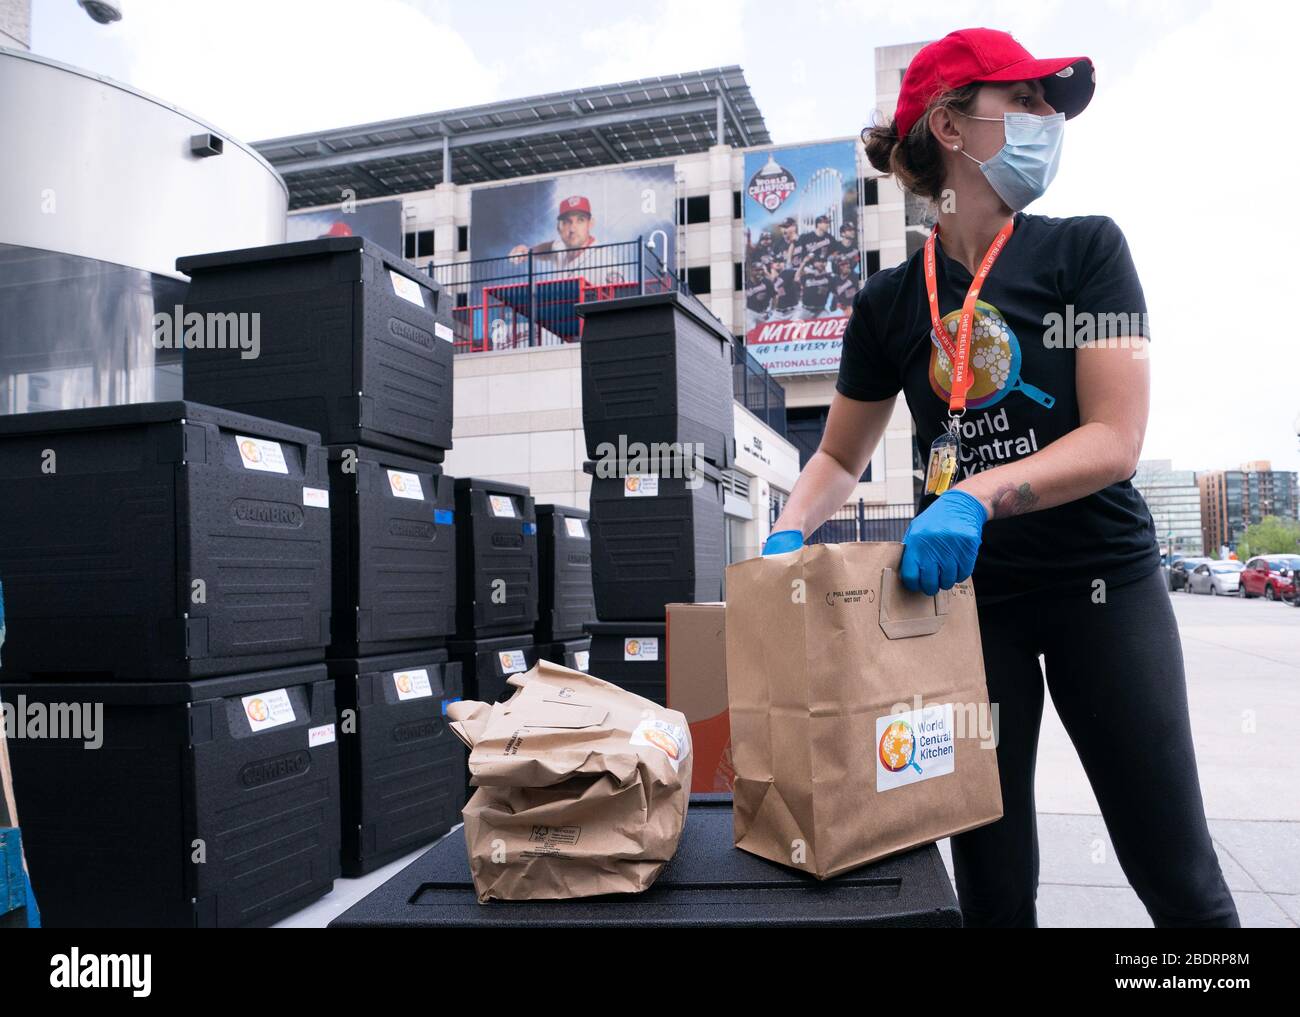 Washington, United States. 09th Apr, 2020. A volunteer with World Central Kitchen's helps distribute food at a distribution site at Nationals Park in Washington, DC on Thursday, April 9, 2020. Jose Andres's World Central Kitchen is using Nationals Park to prepare and distribute food to agencies that help needed individuals during the Coronavirus pandemic. Photo by Kevin Dietsch/UPI Credit: UPI/Alamy Live News Stock Photo